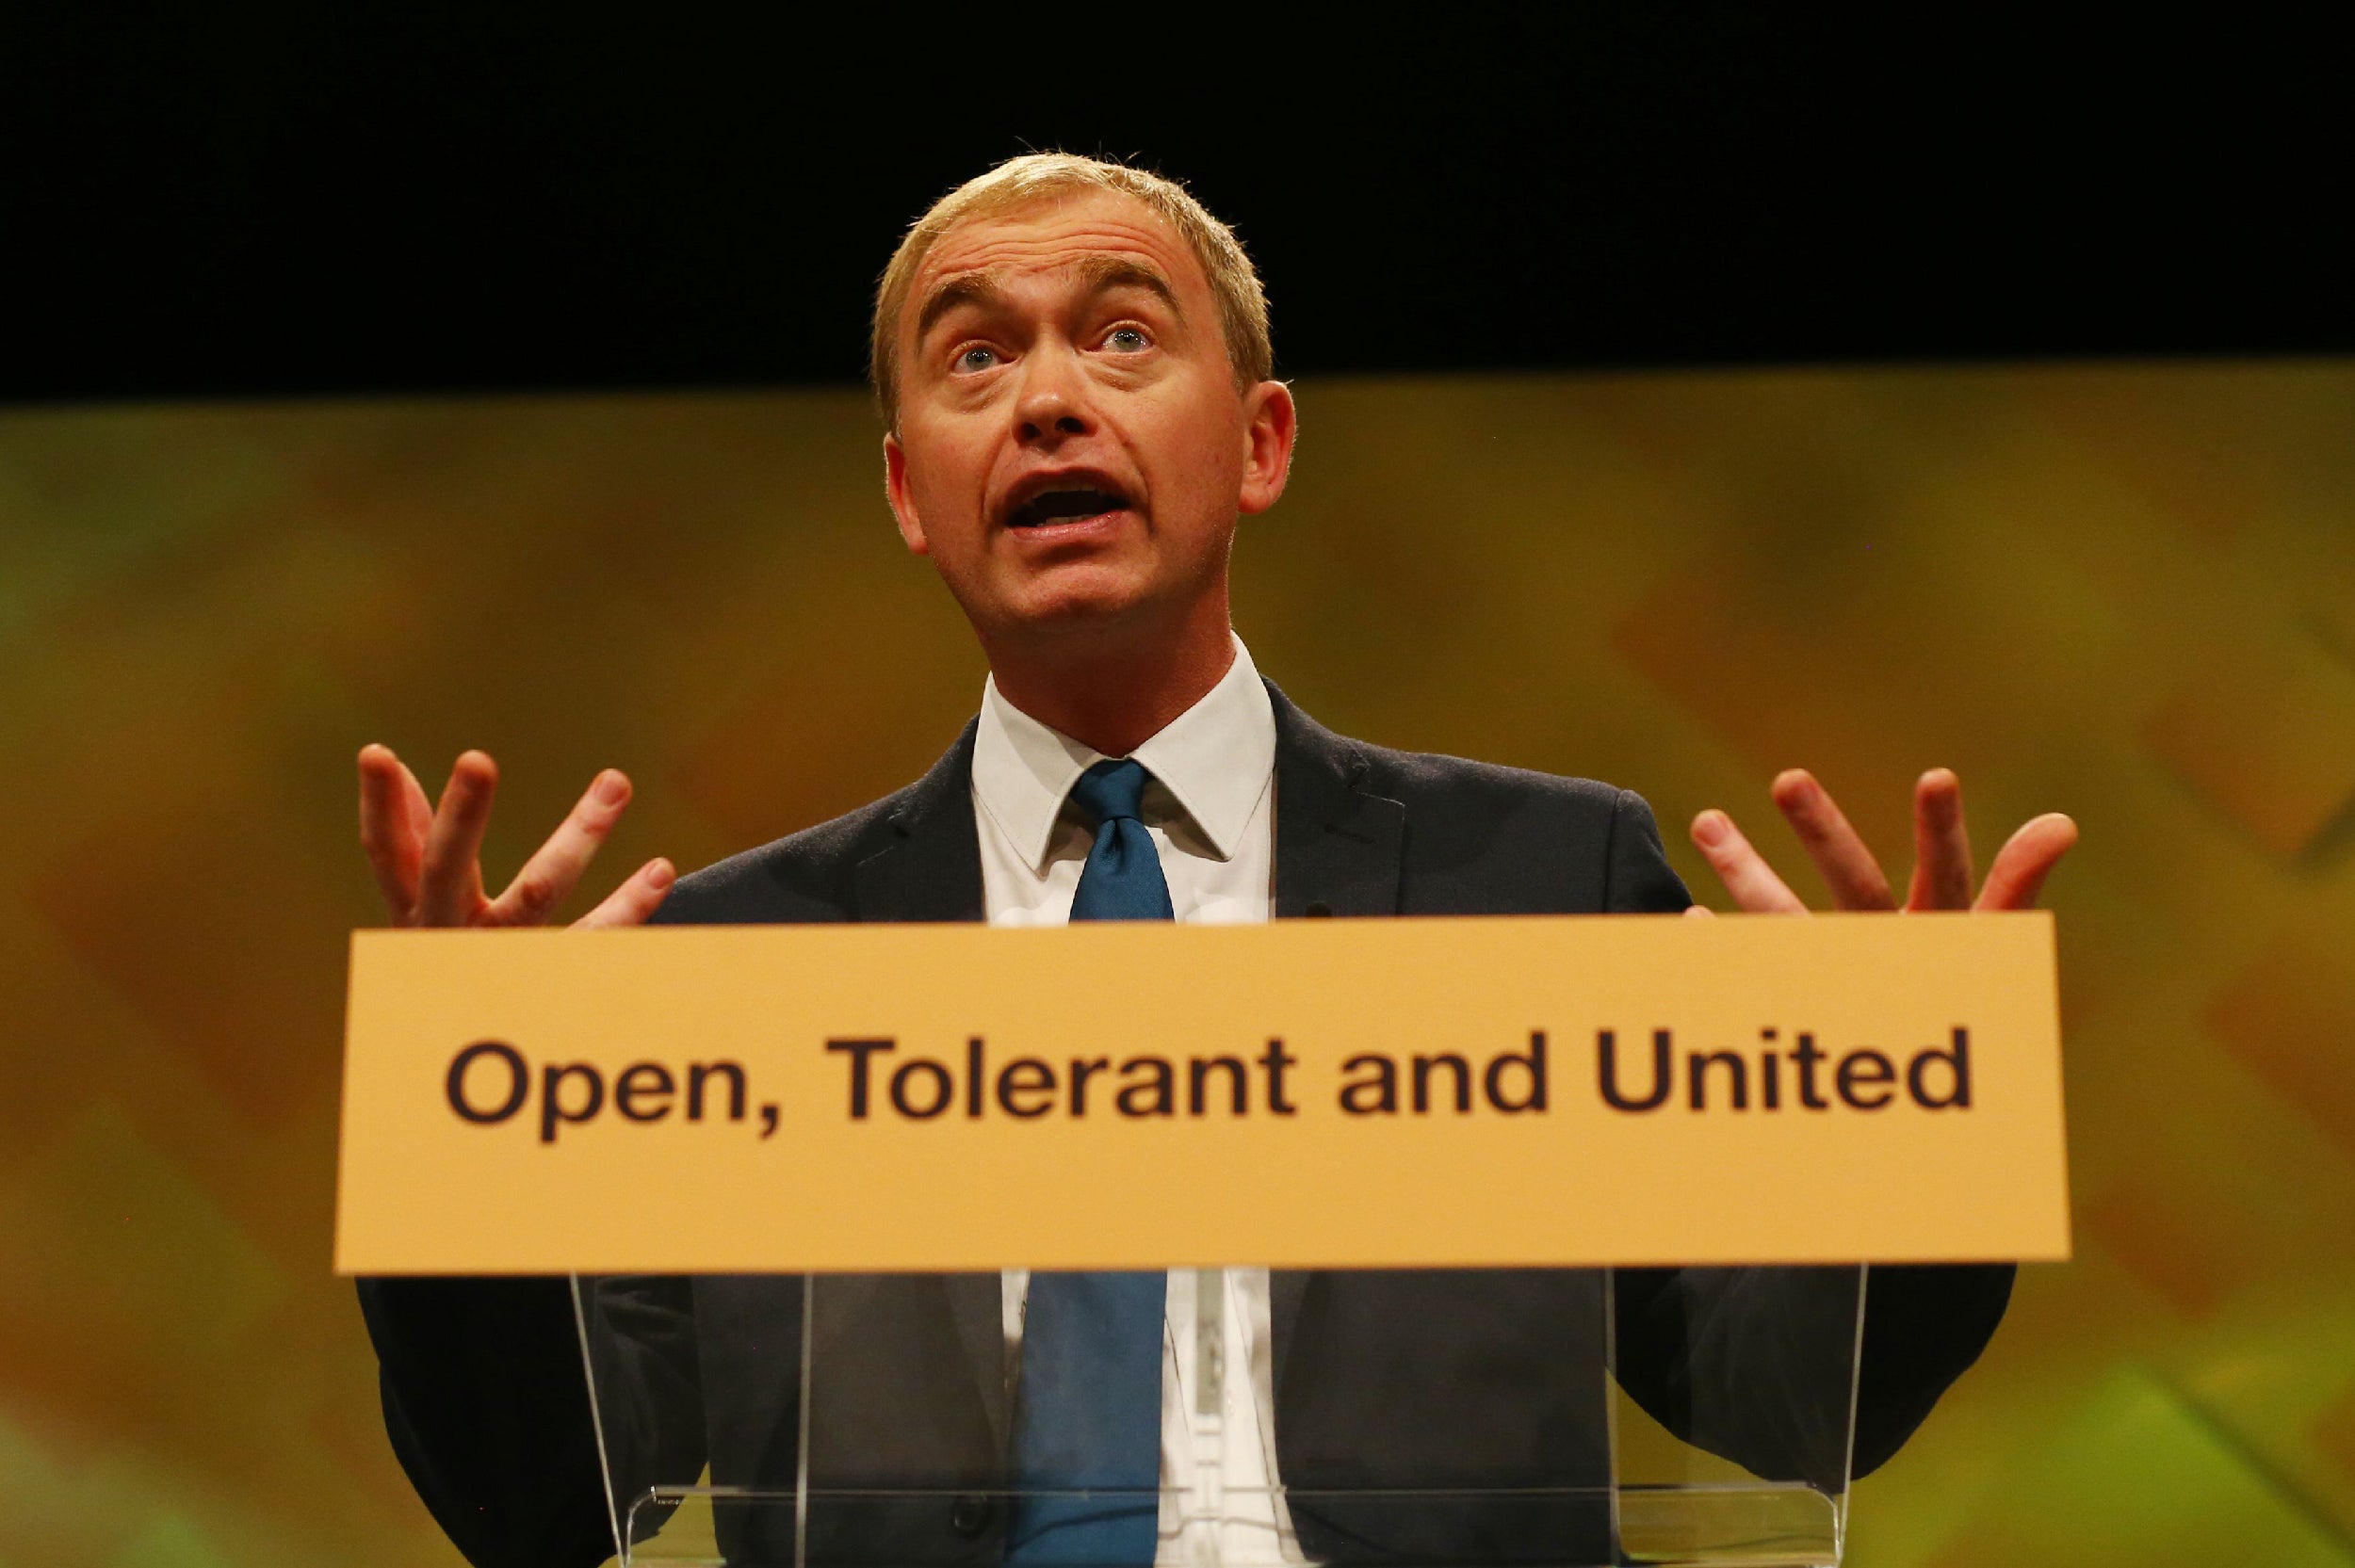 ‘If Labour won’t provide a decent opposition, the Liberal Democrats will. We are not squeamish about holding power’